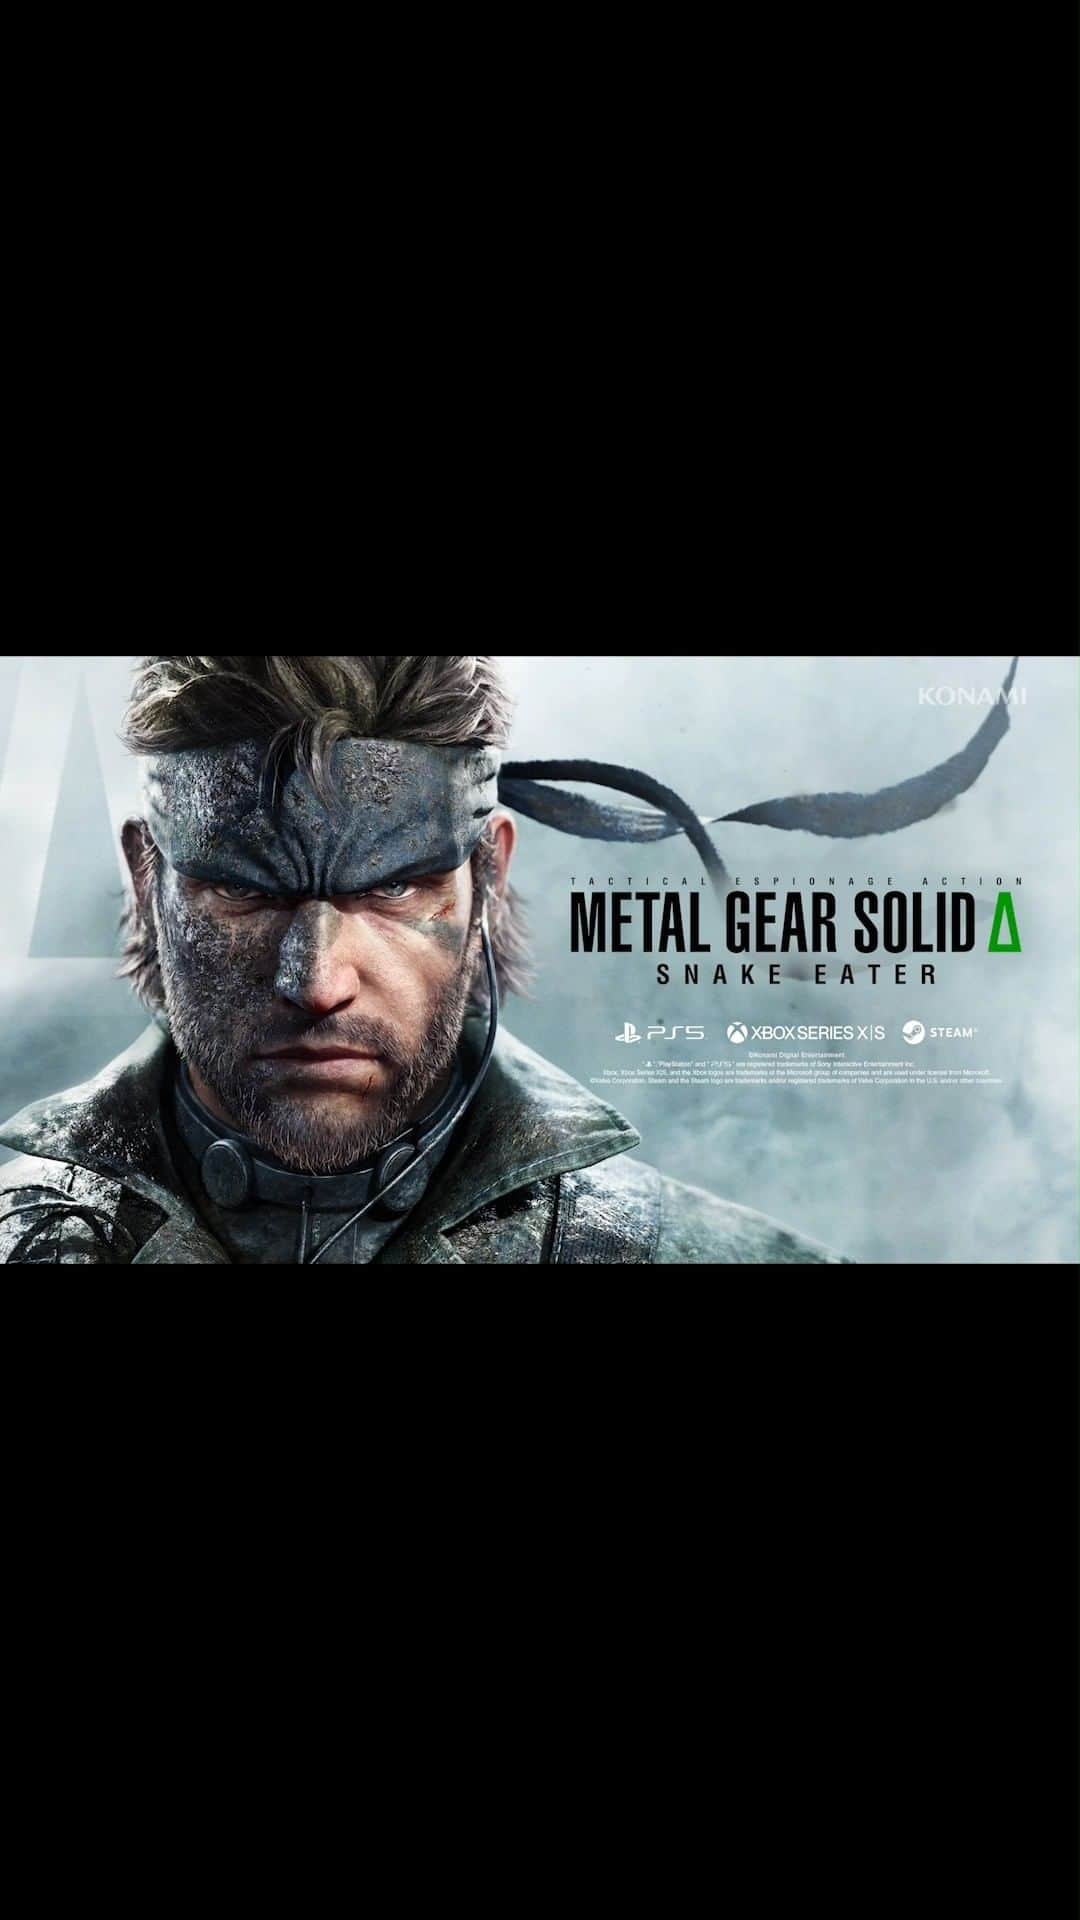 KONAMIのインスタグラム：「! MGS REMAKE ANNOUNCEMENT !  METAL GEAR SOLID Δ: SNAKE EATER, a remake of MGS3, is on its way. Prepare to relive the origin story of Big Boss and the Metal Gear saga.  Click here for the teaser site: https://www.konami.com/mg/mgs3r/us/en/  #MetalGearSolid #MGSDelta #MG35th」